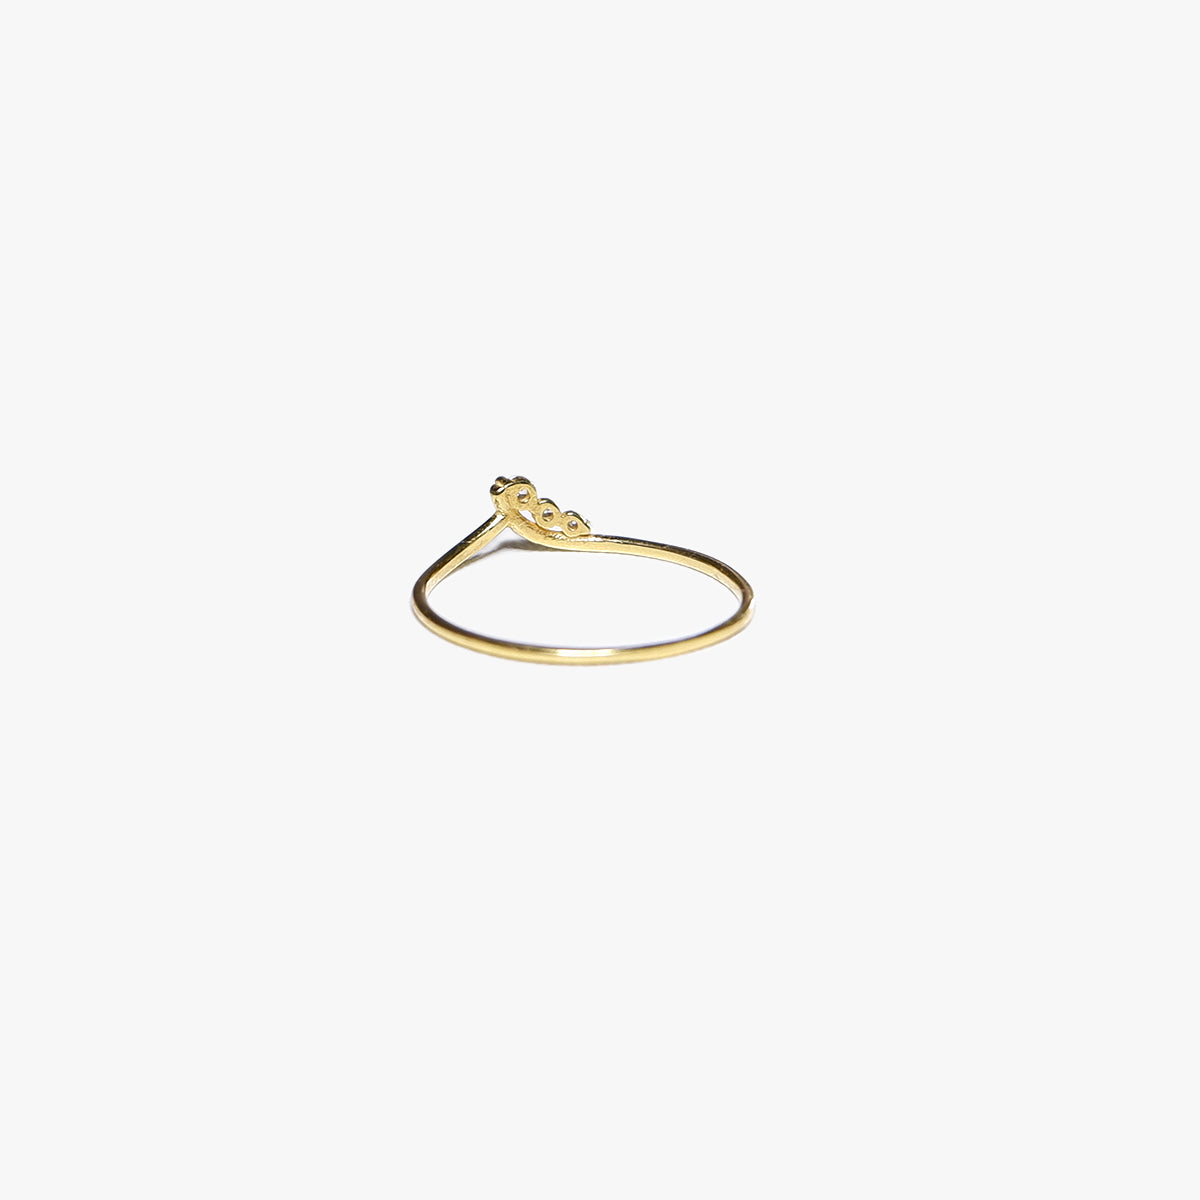 The Ocean Ring in Solid Gold